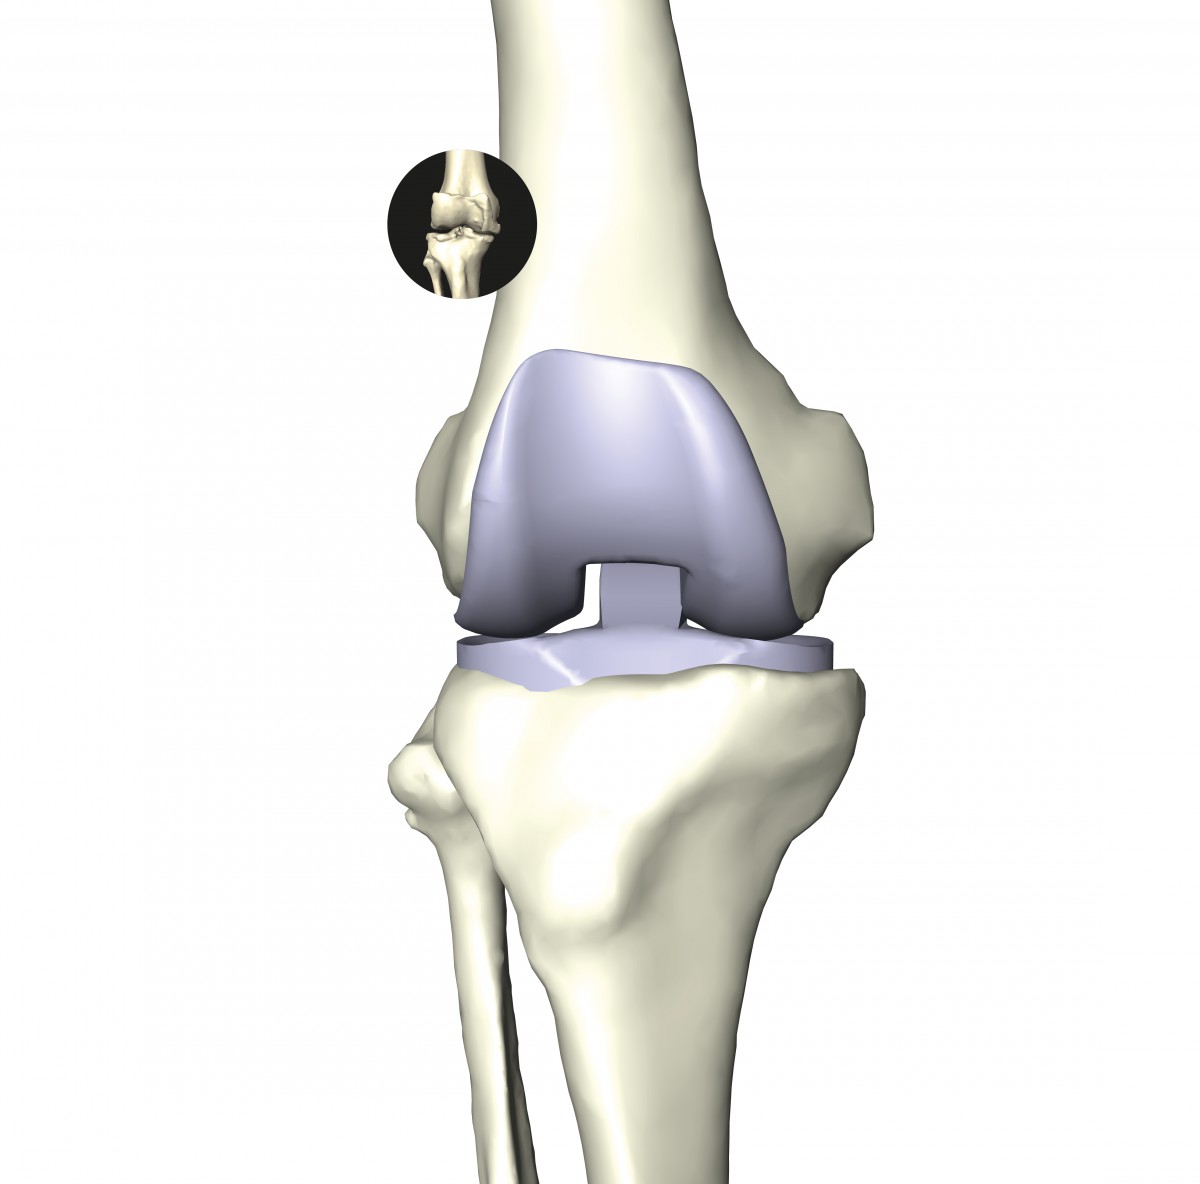 Individual anatomy reconstruction of the knee bones allows 3D planning of implant positioning. Mechanical simulations taking cartilage, patella, tendons, and ligaments into account improve the understanding of degenerative diseases and the functionally appropriate positioning of implants.